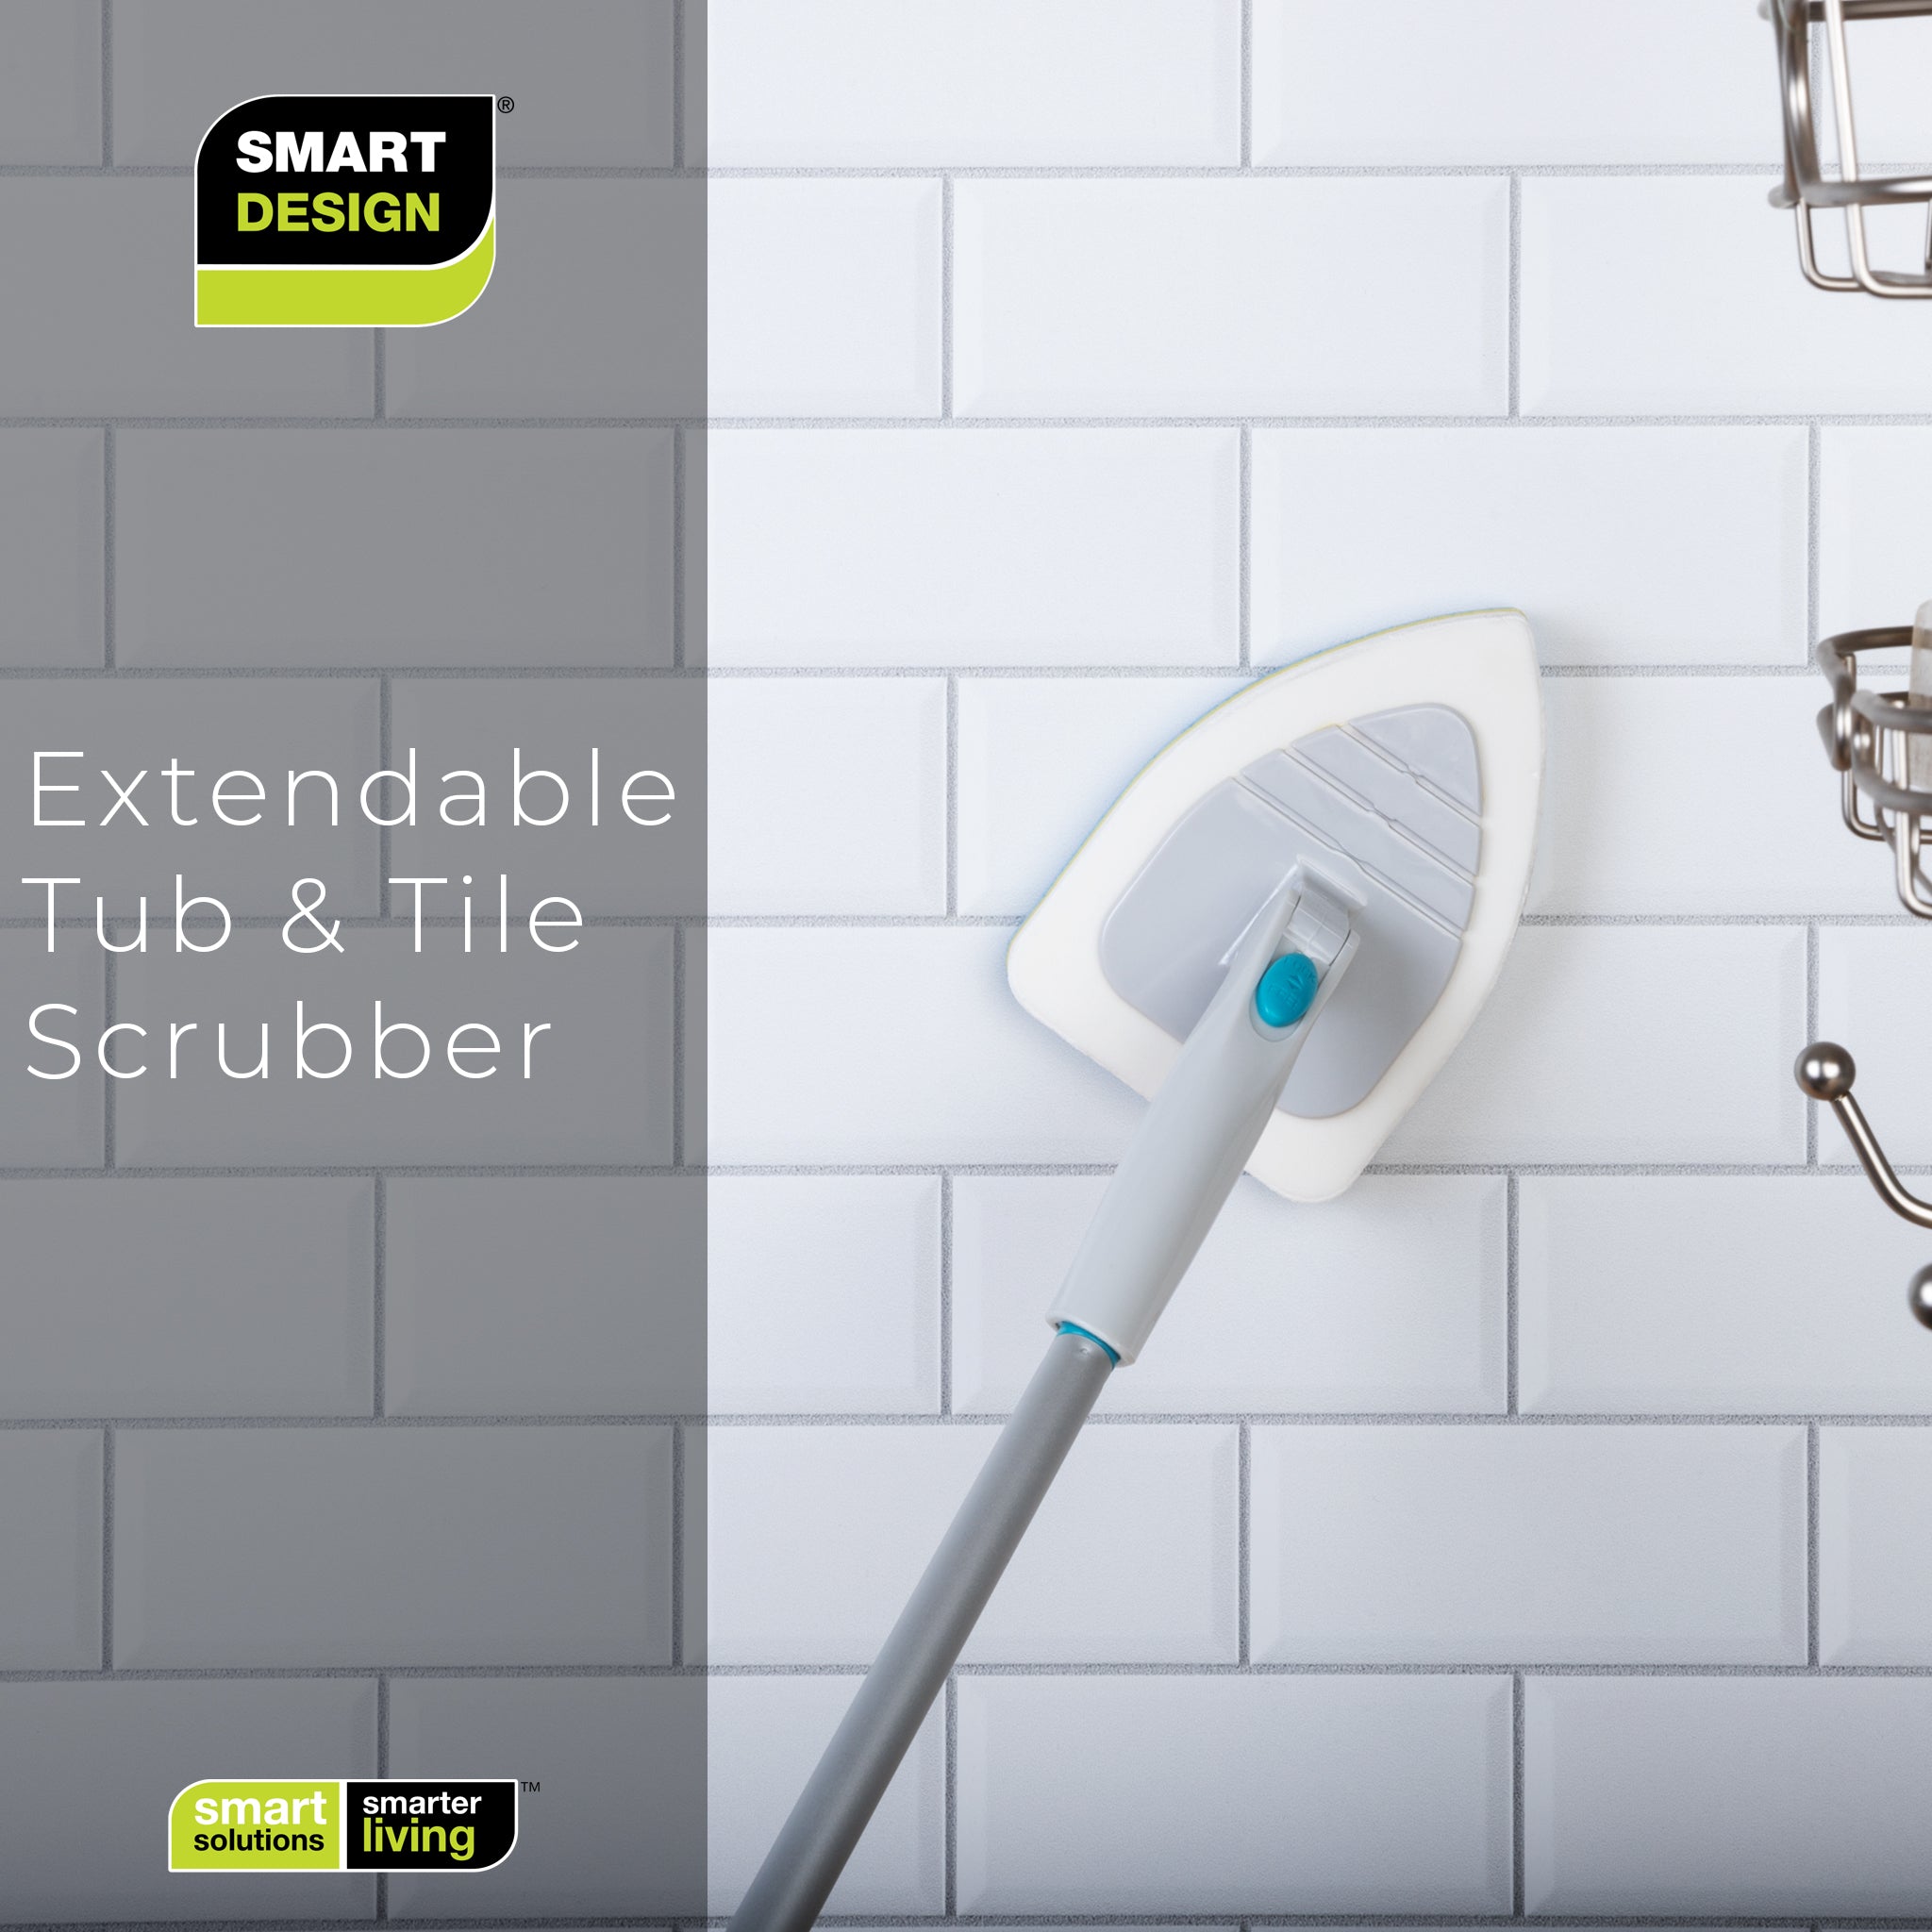 Extendable Tub and Tile Scrubber - Smart Design® 14